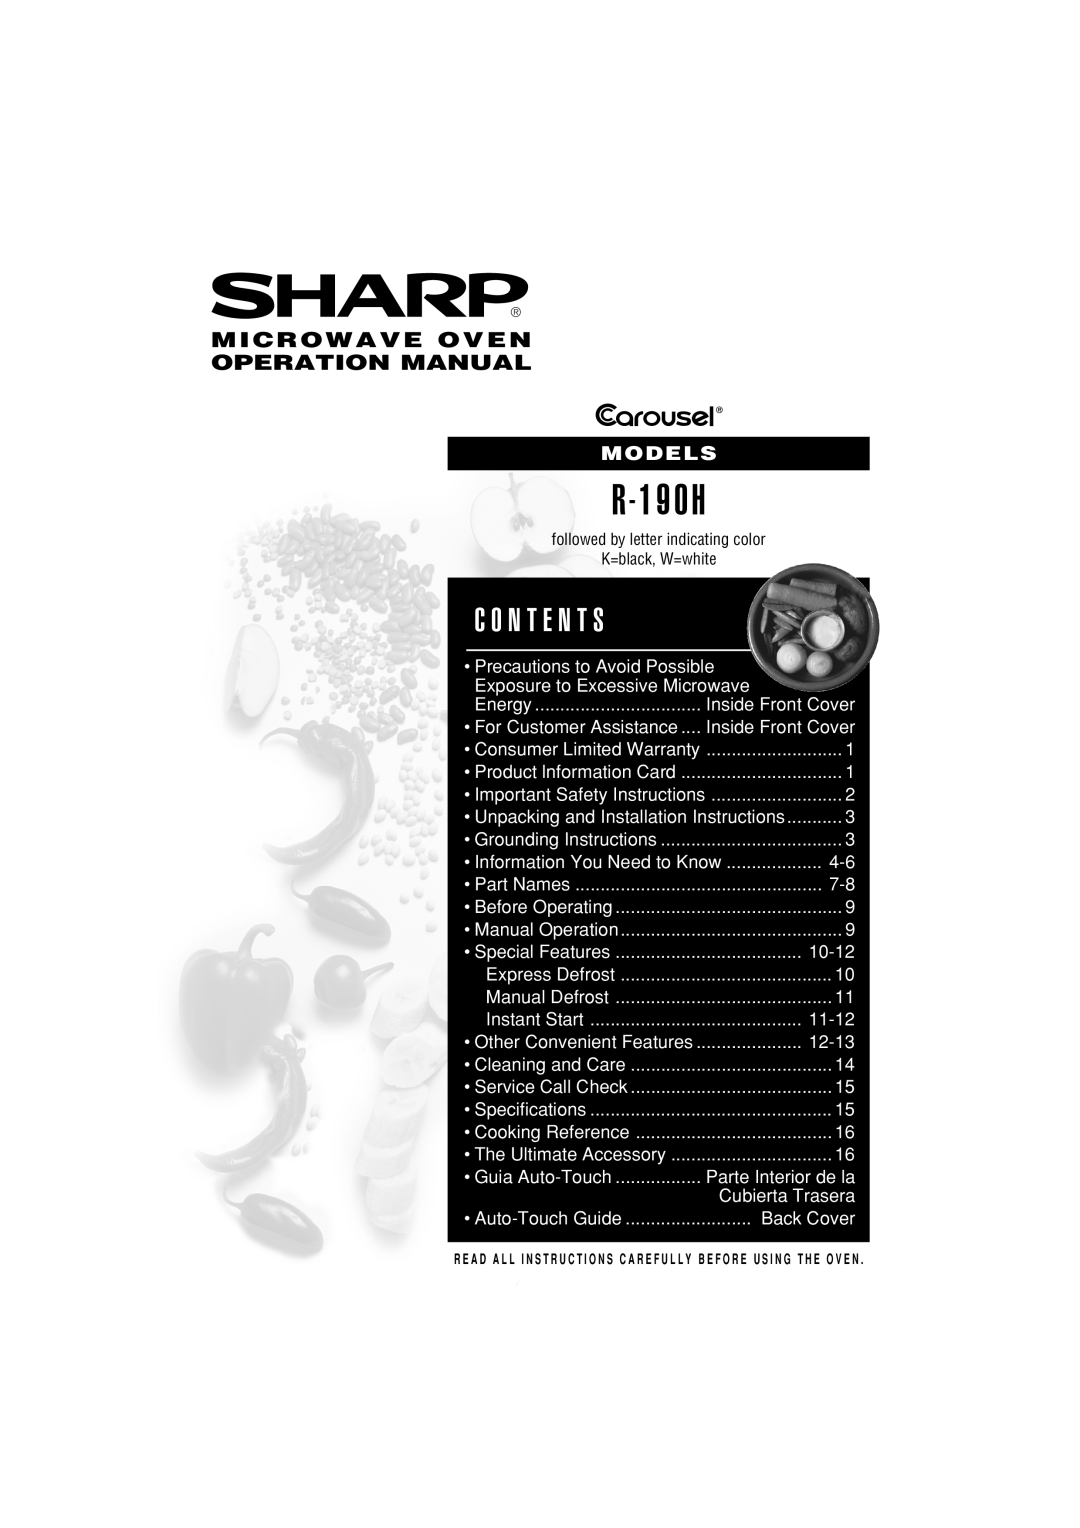 Sharp R-190HK/HW operation manual C O N T E N T S, Microwave Oven Operation Manual, R - 1 9 0 H, Models 